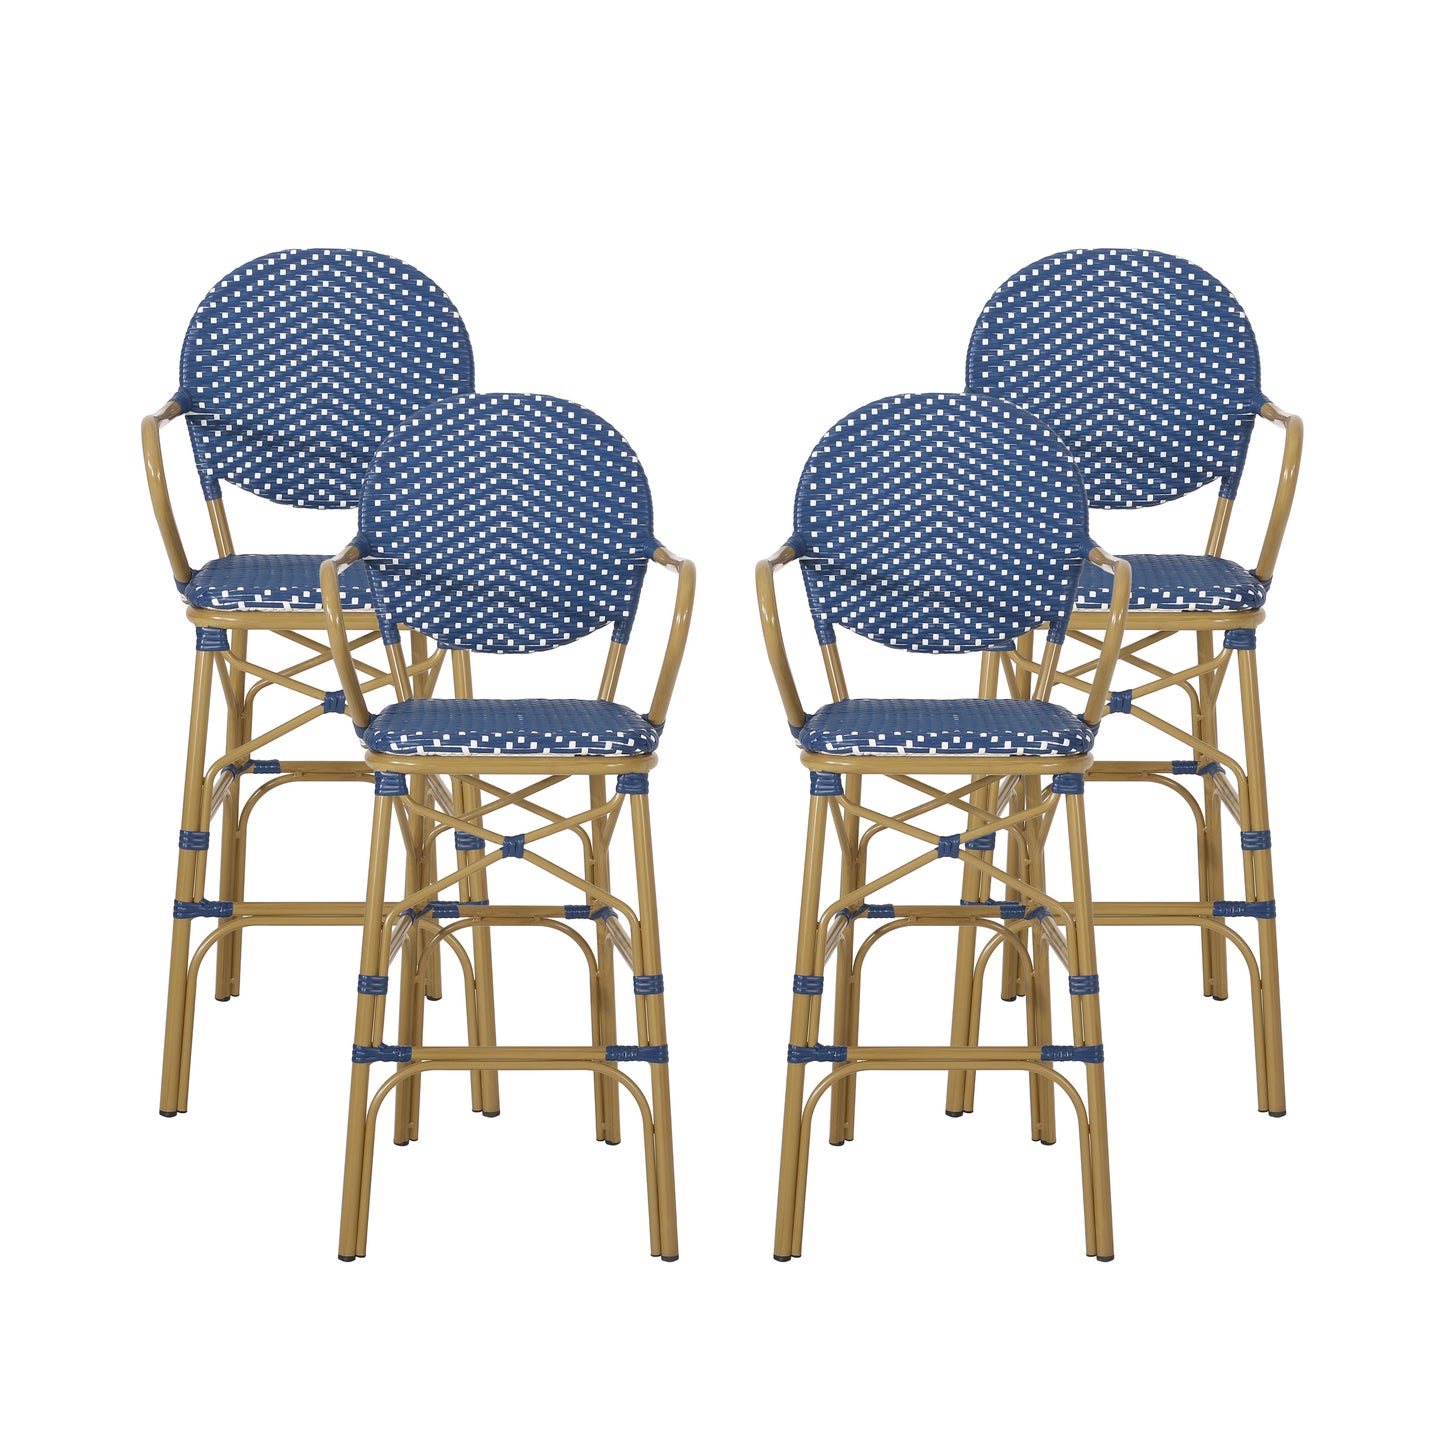 Danberry Outdoor Wicker and Aluminum 29.5 Inch French Barstools, Set of 4